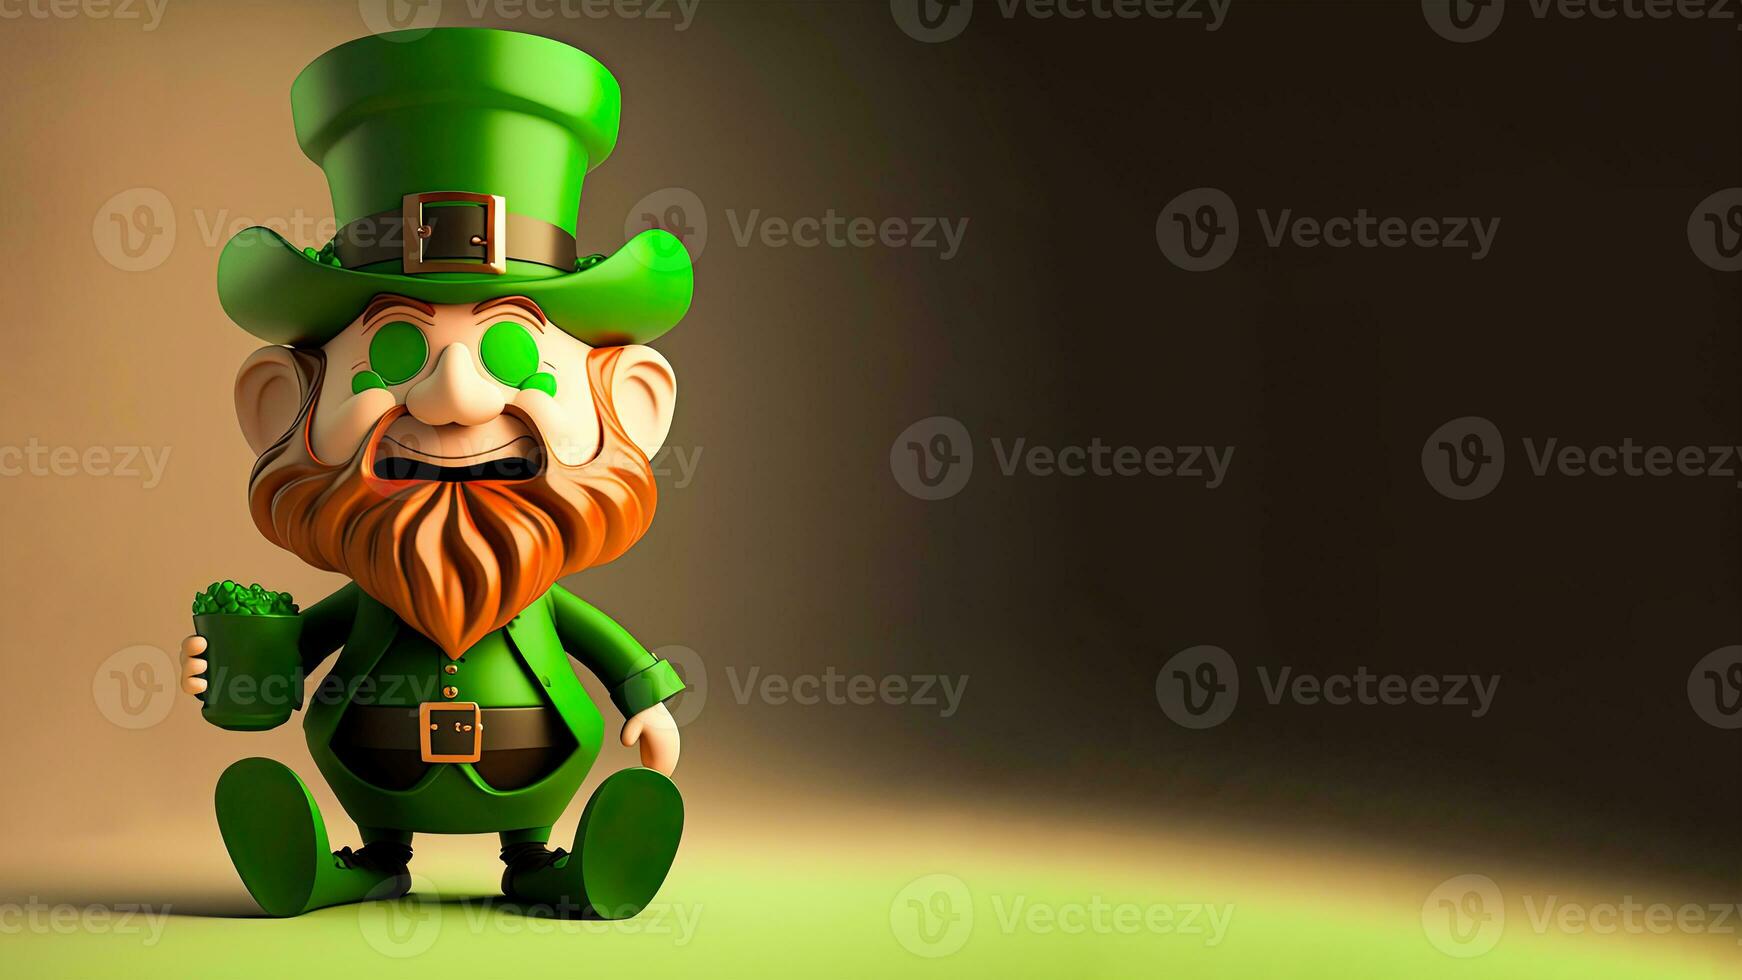 3D Render of Cheerful Leprechaun Man Holding Drink Glass And Copy Space. St. Patrick's Day Concept. photo